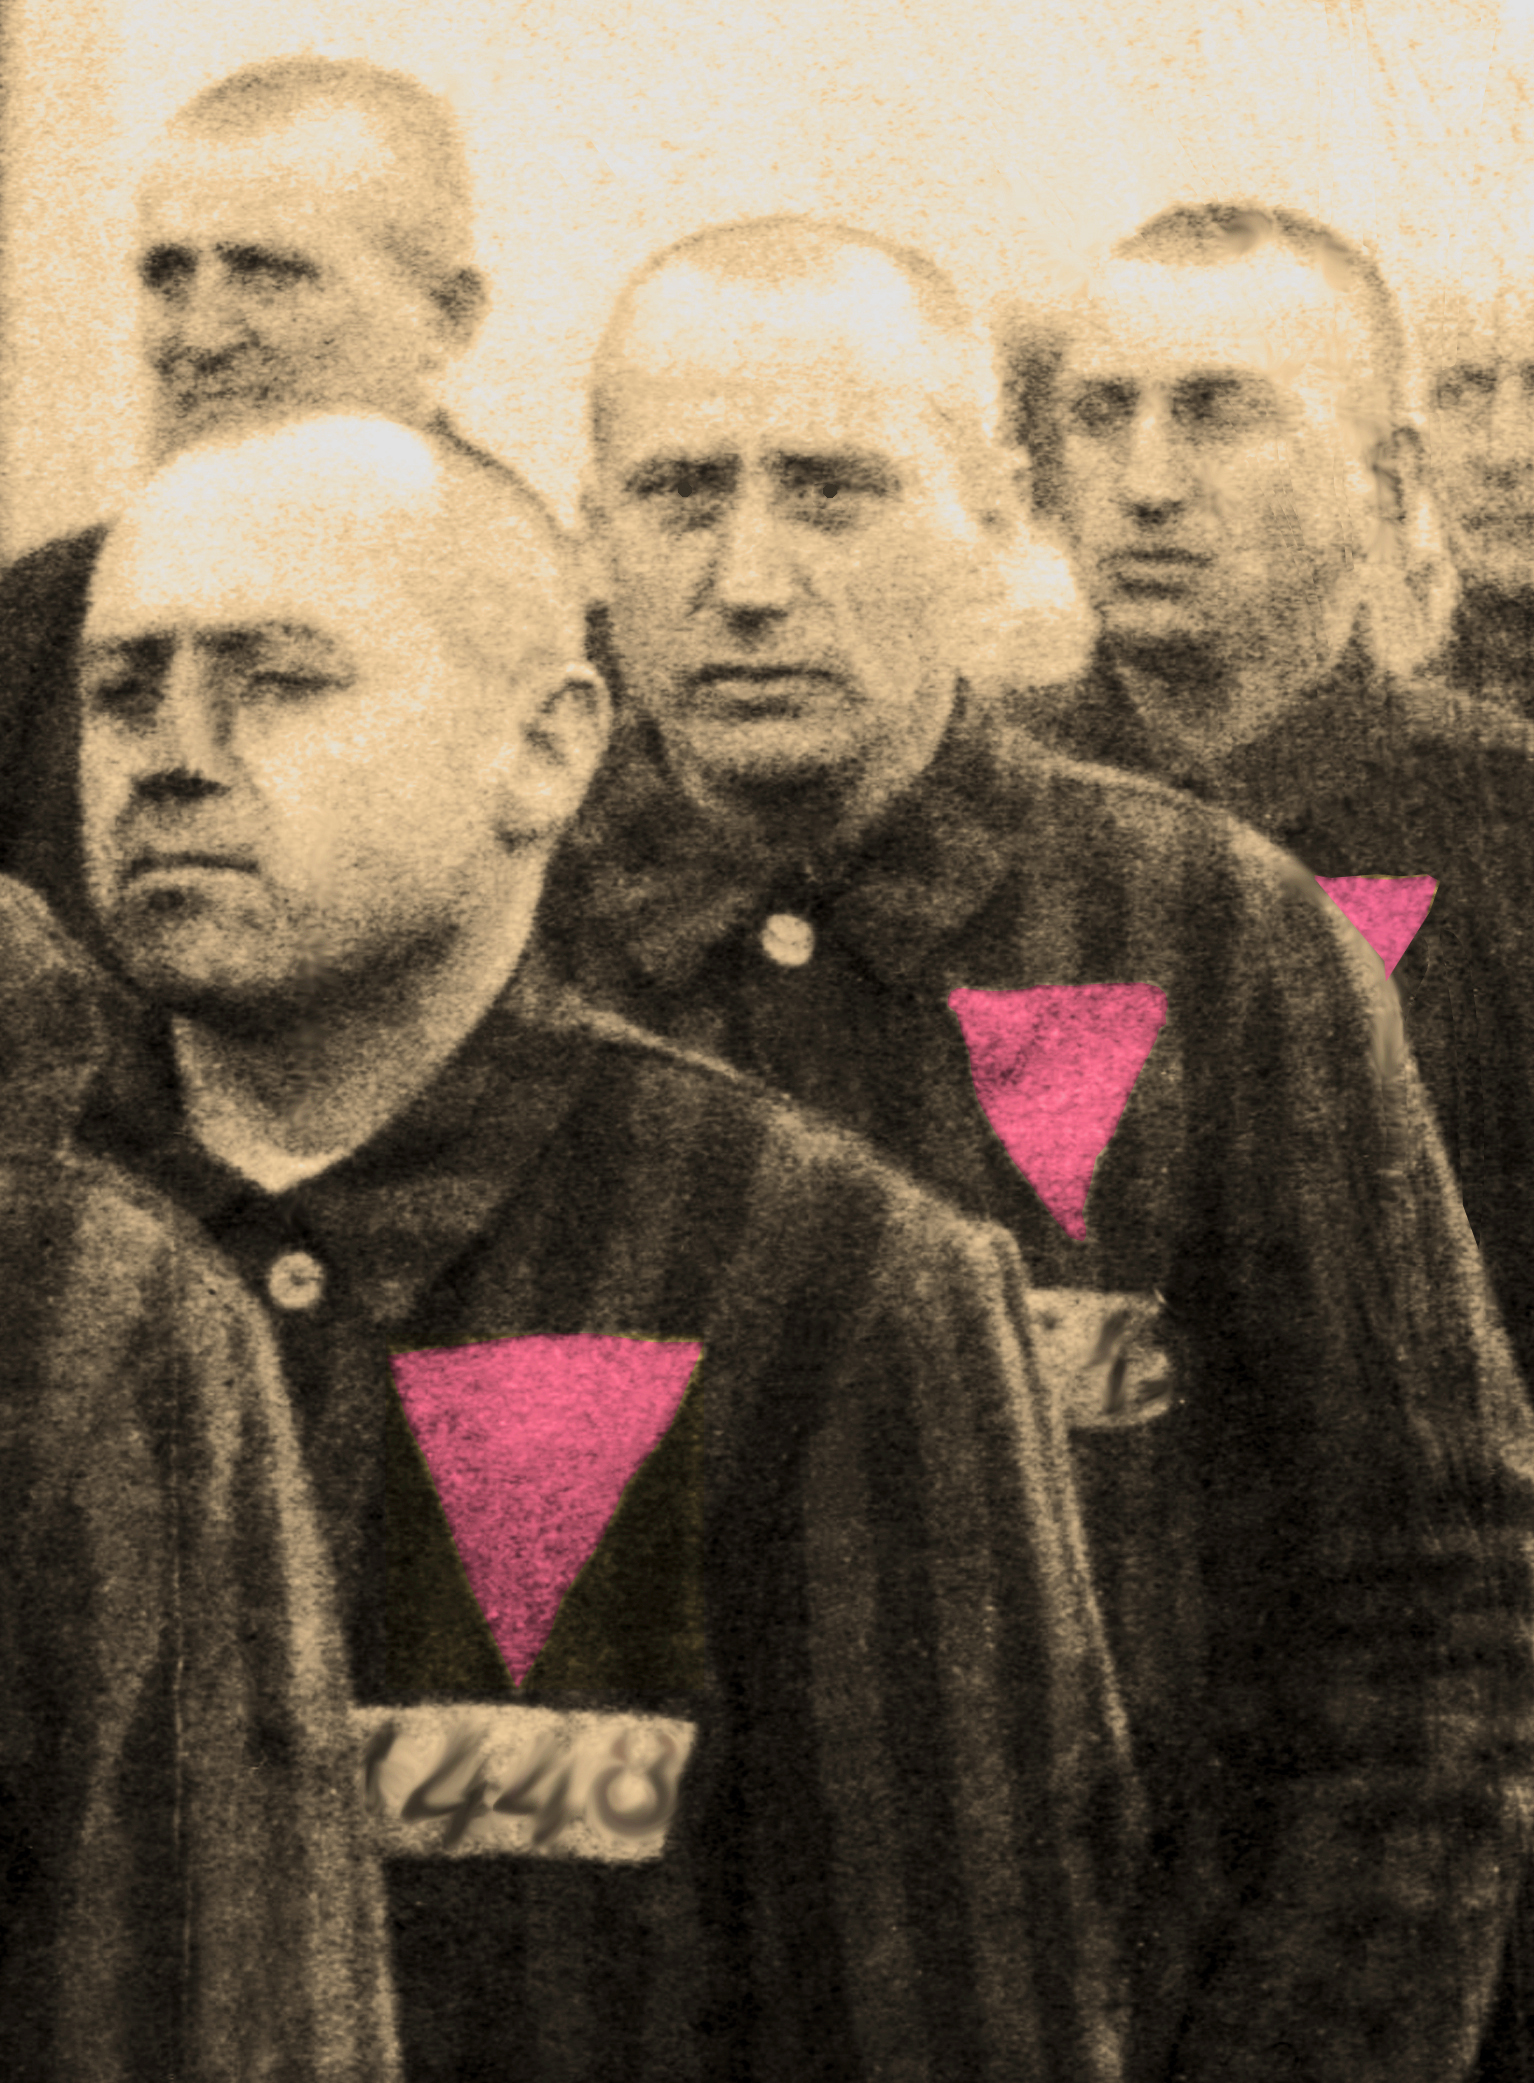 Nazi's concentration camps pink triangle